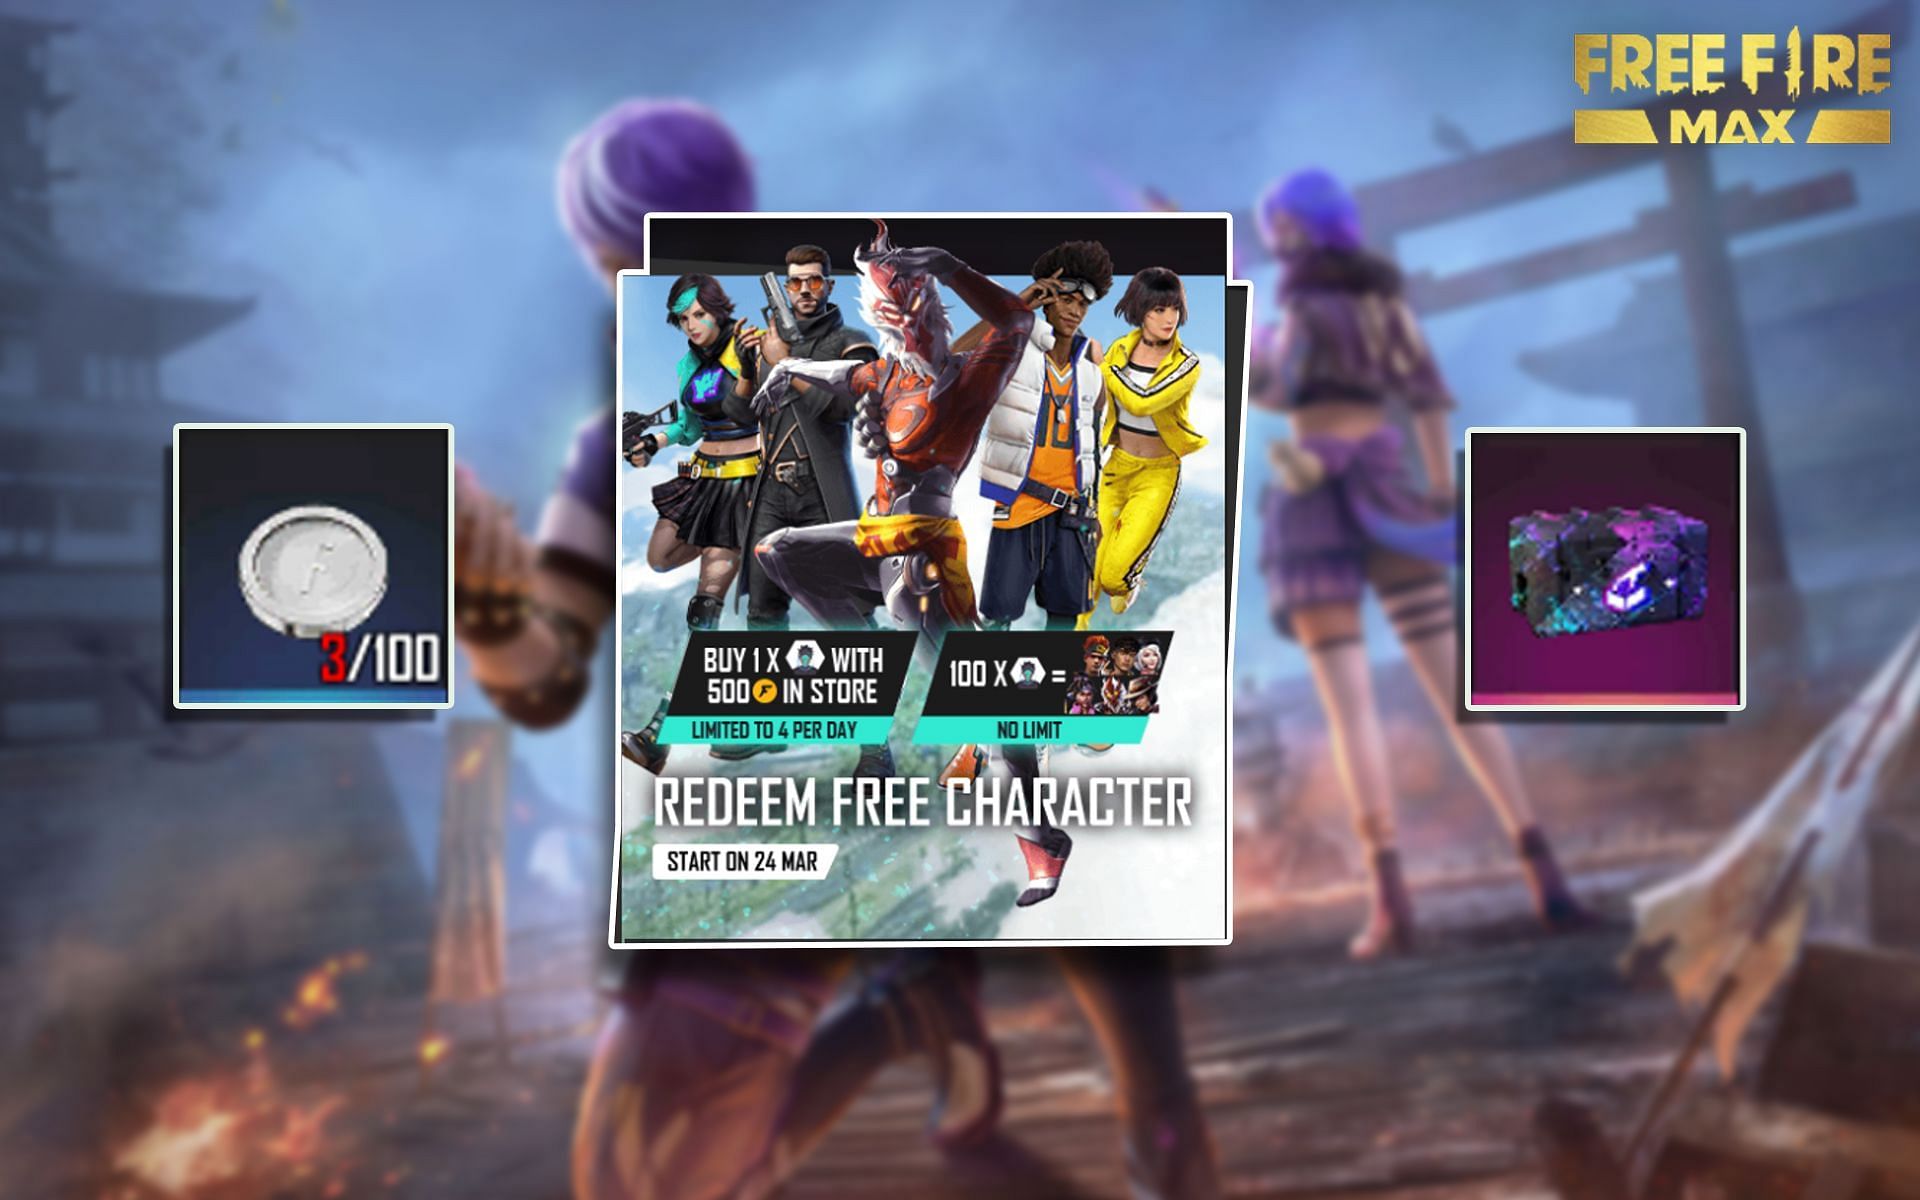 Free characters can be obtained in Free Fire MAX through the ongoing event (Image via Sporskeeda)